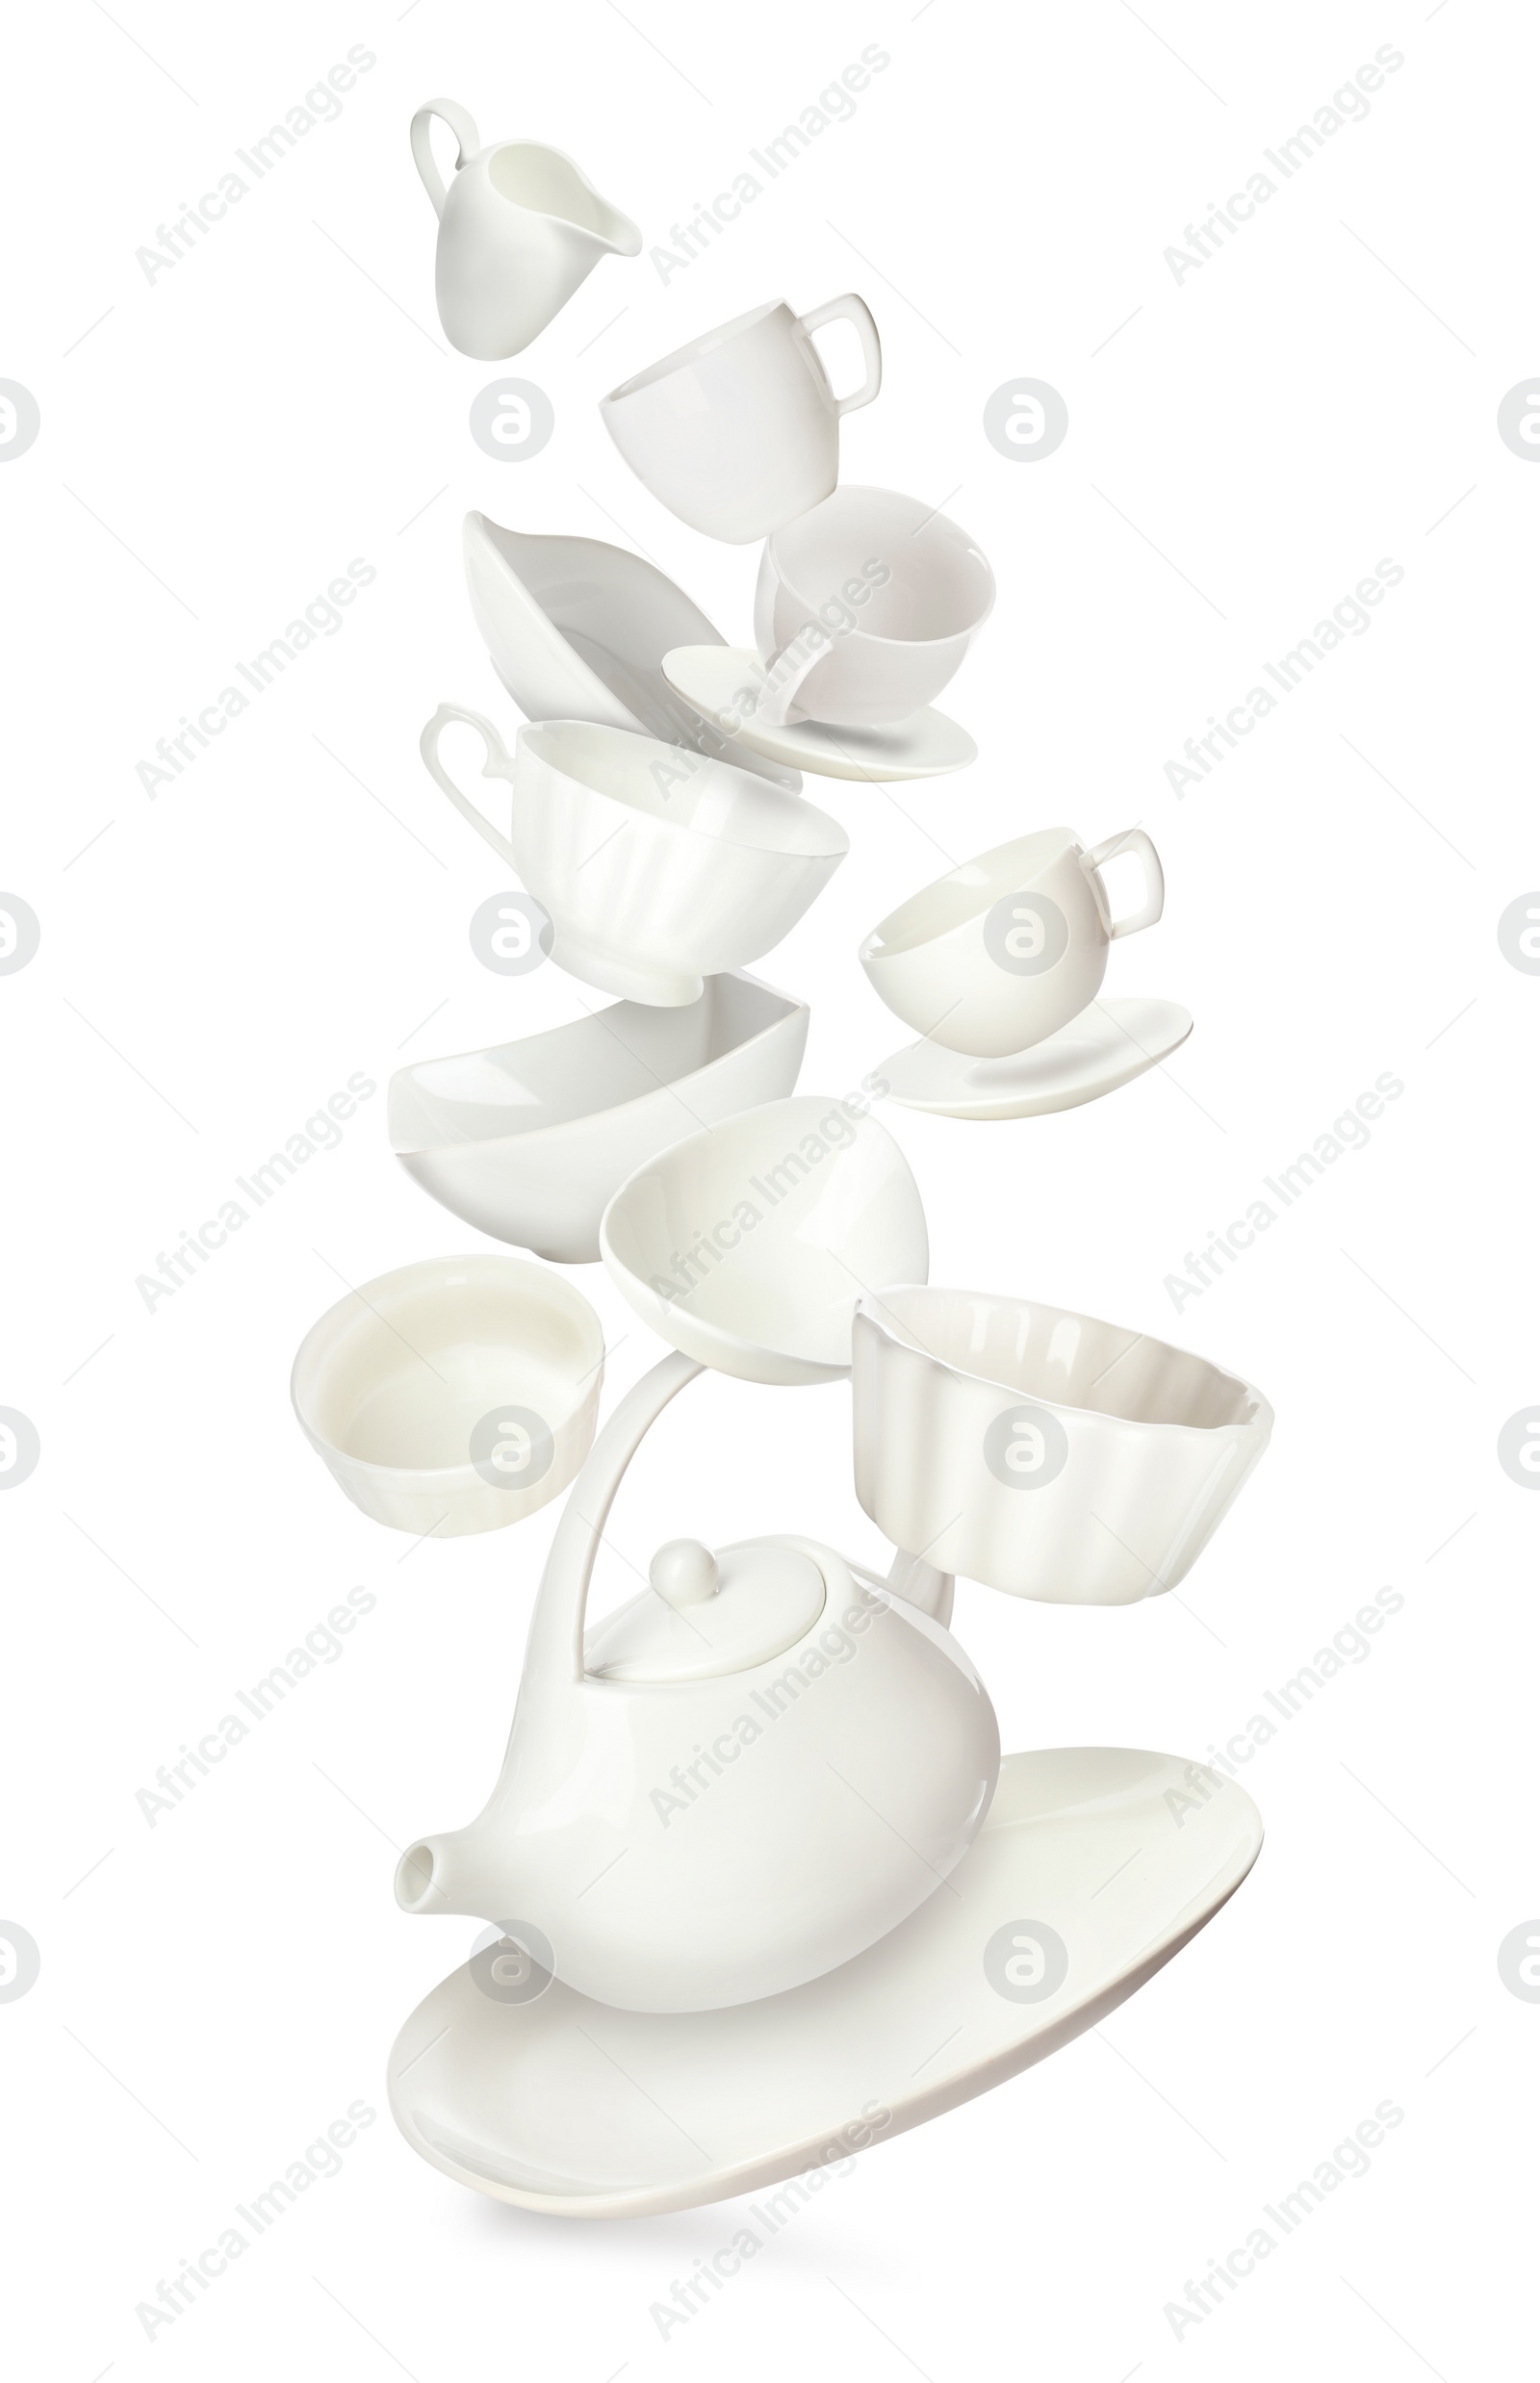 Image of Set of clean tableware in flight on white background